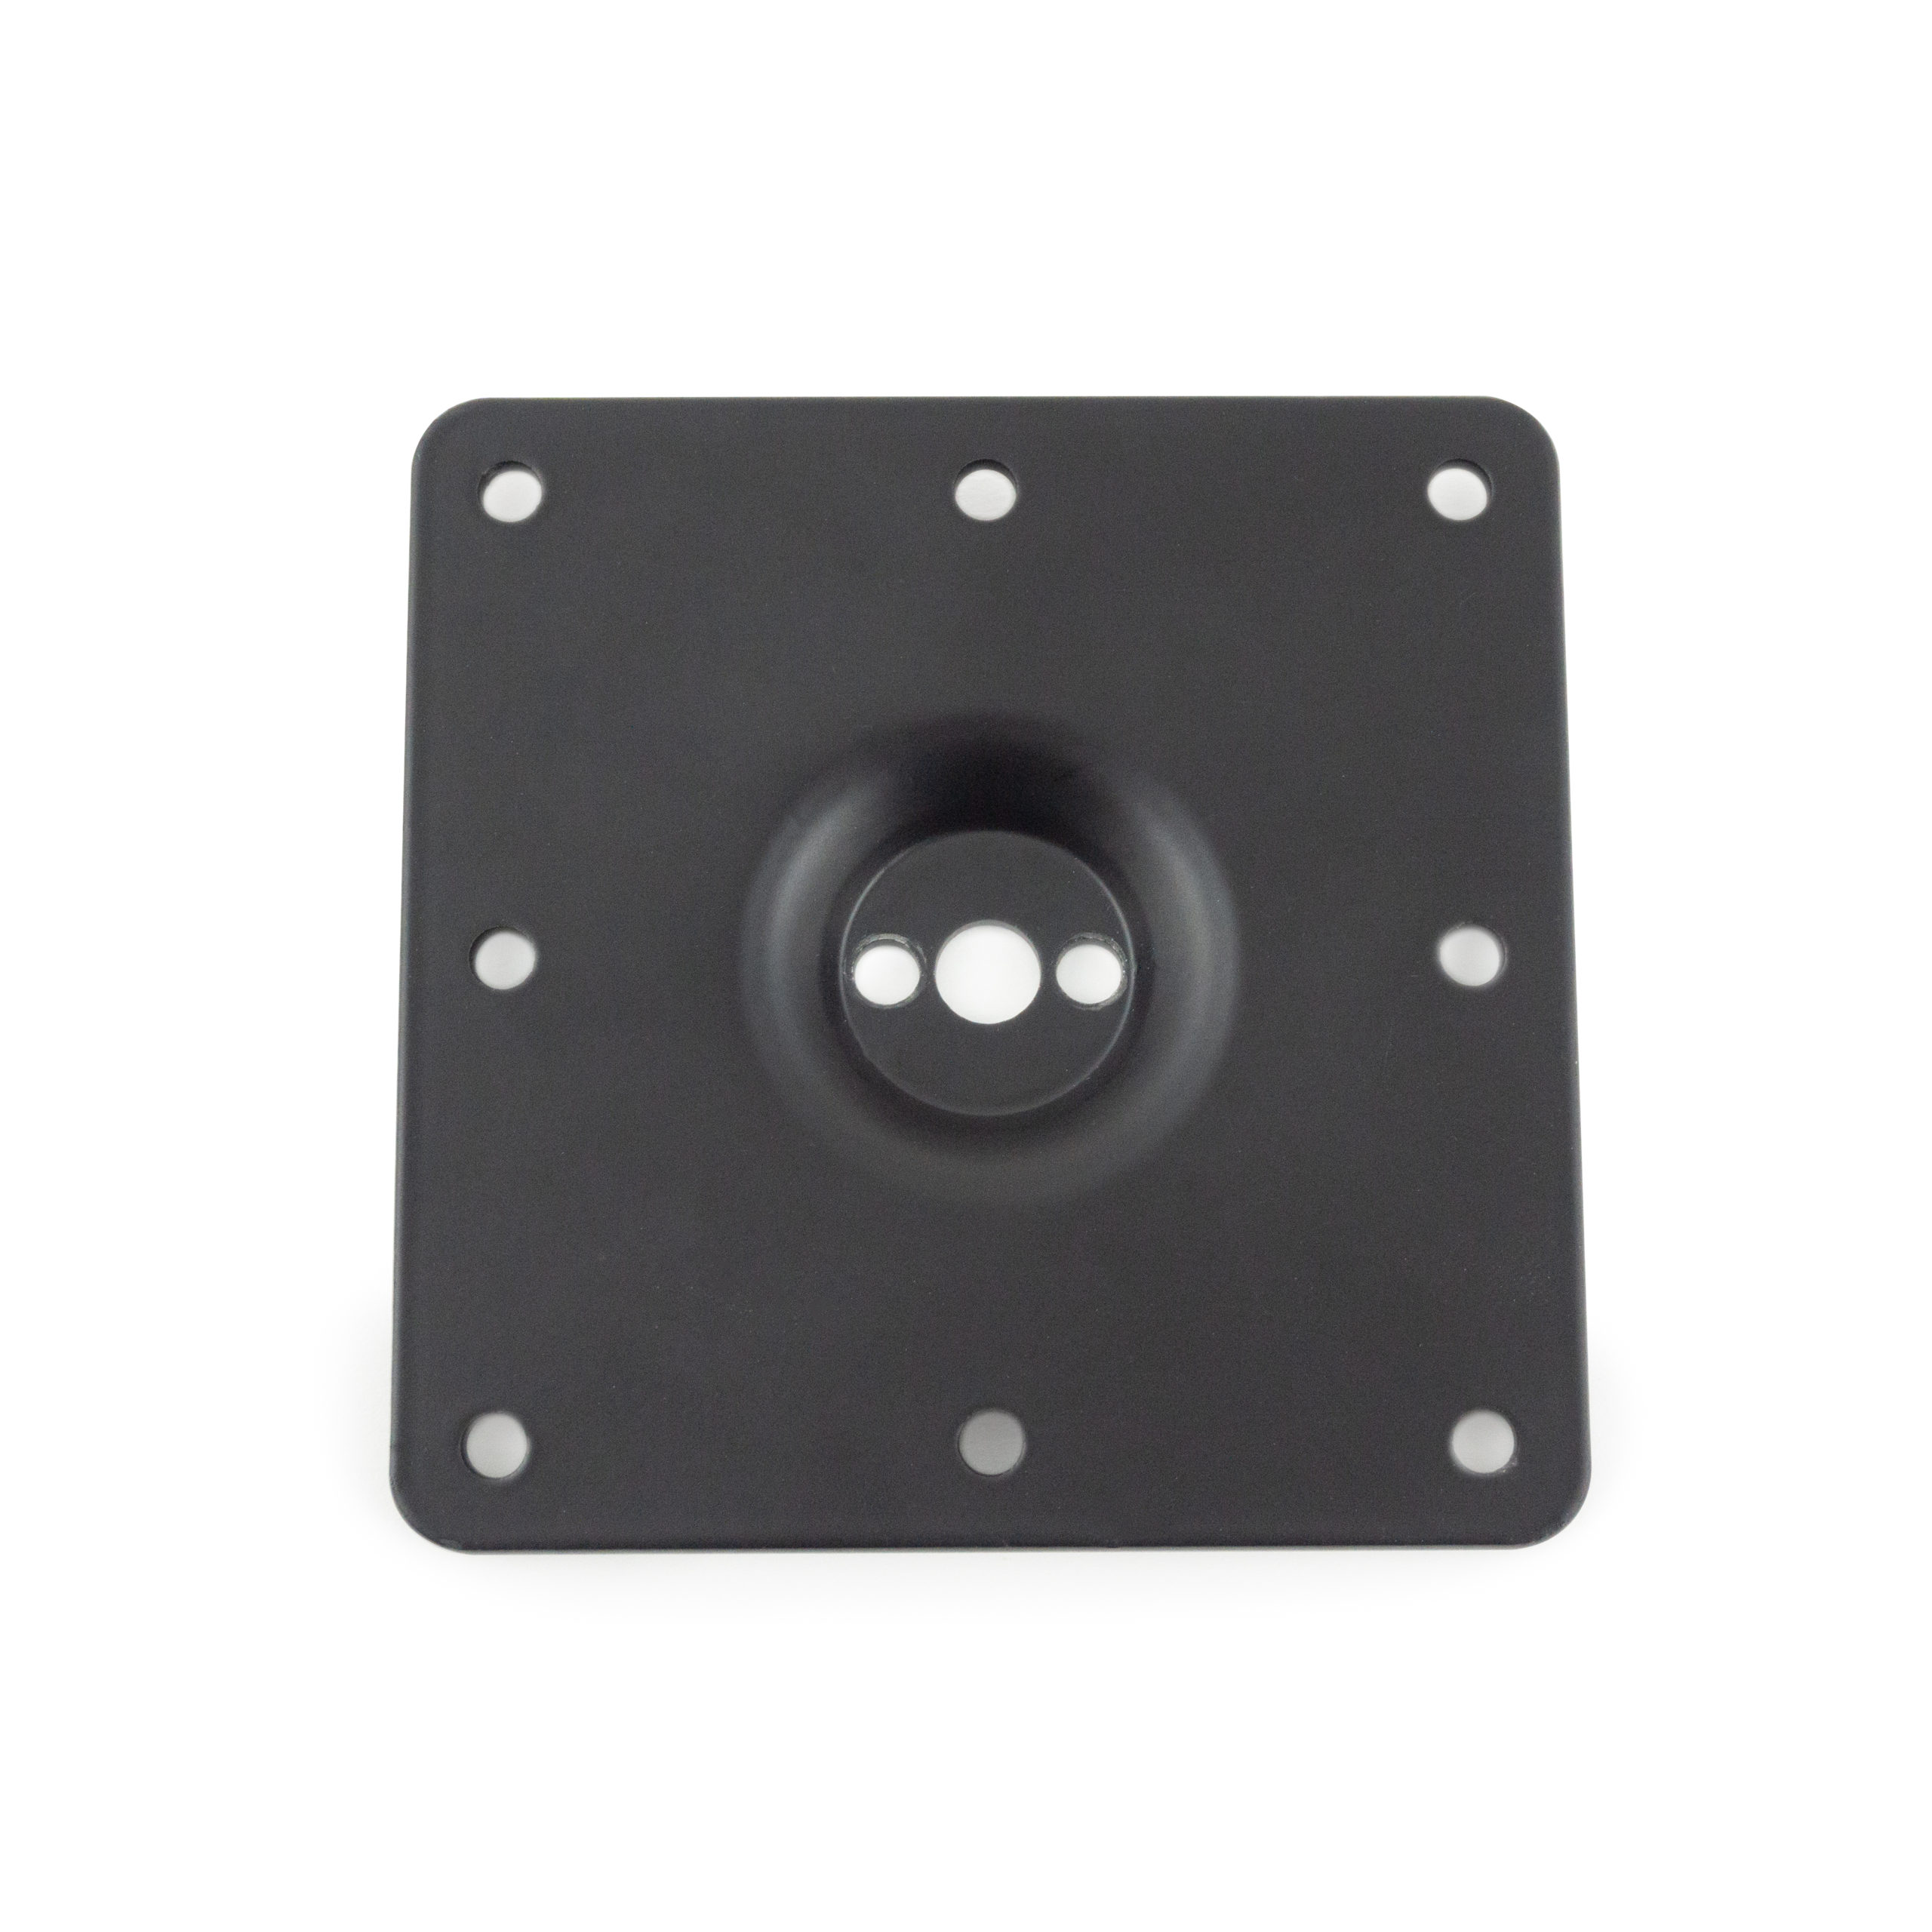 A black wall plate with holes on it.